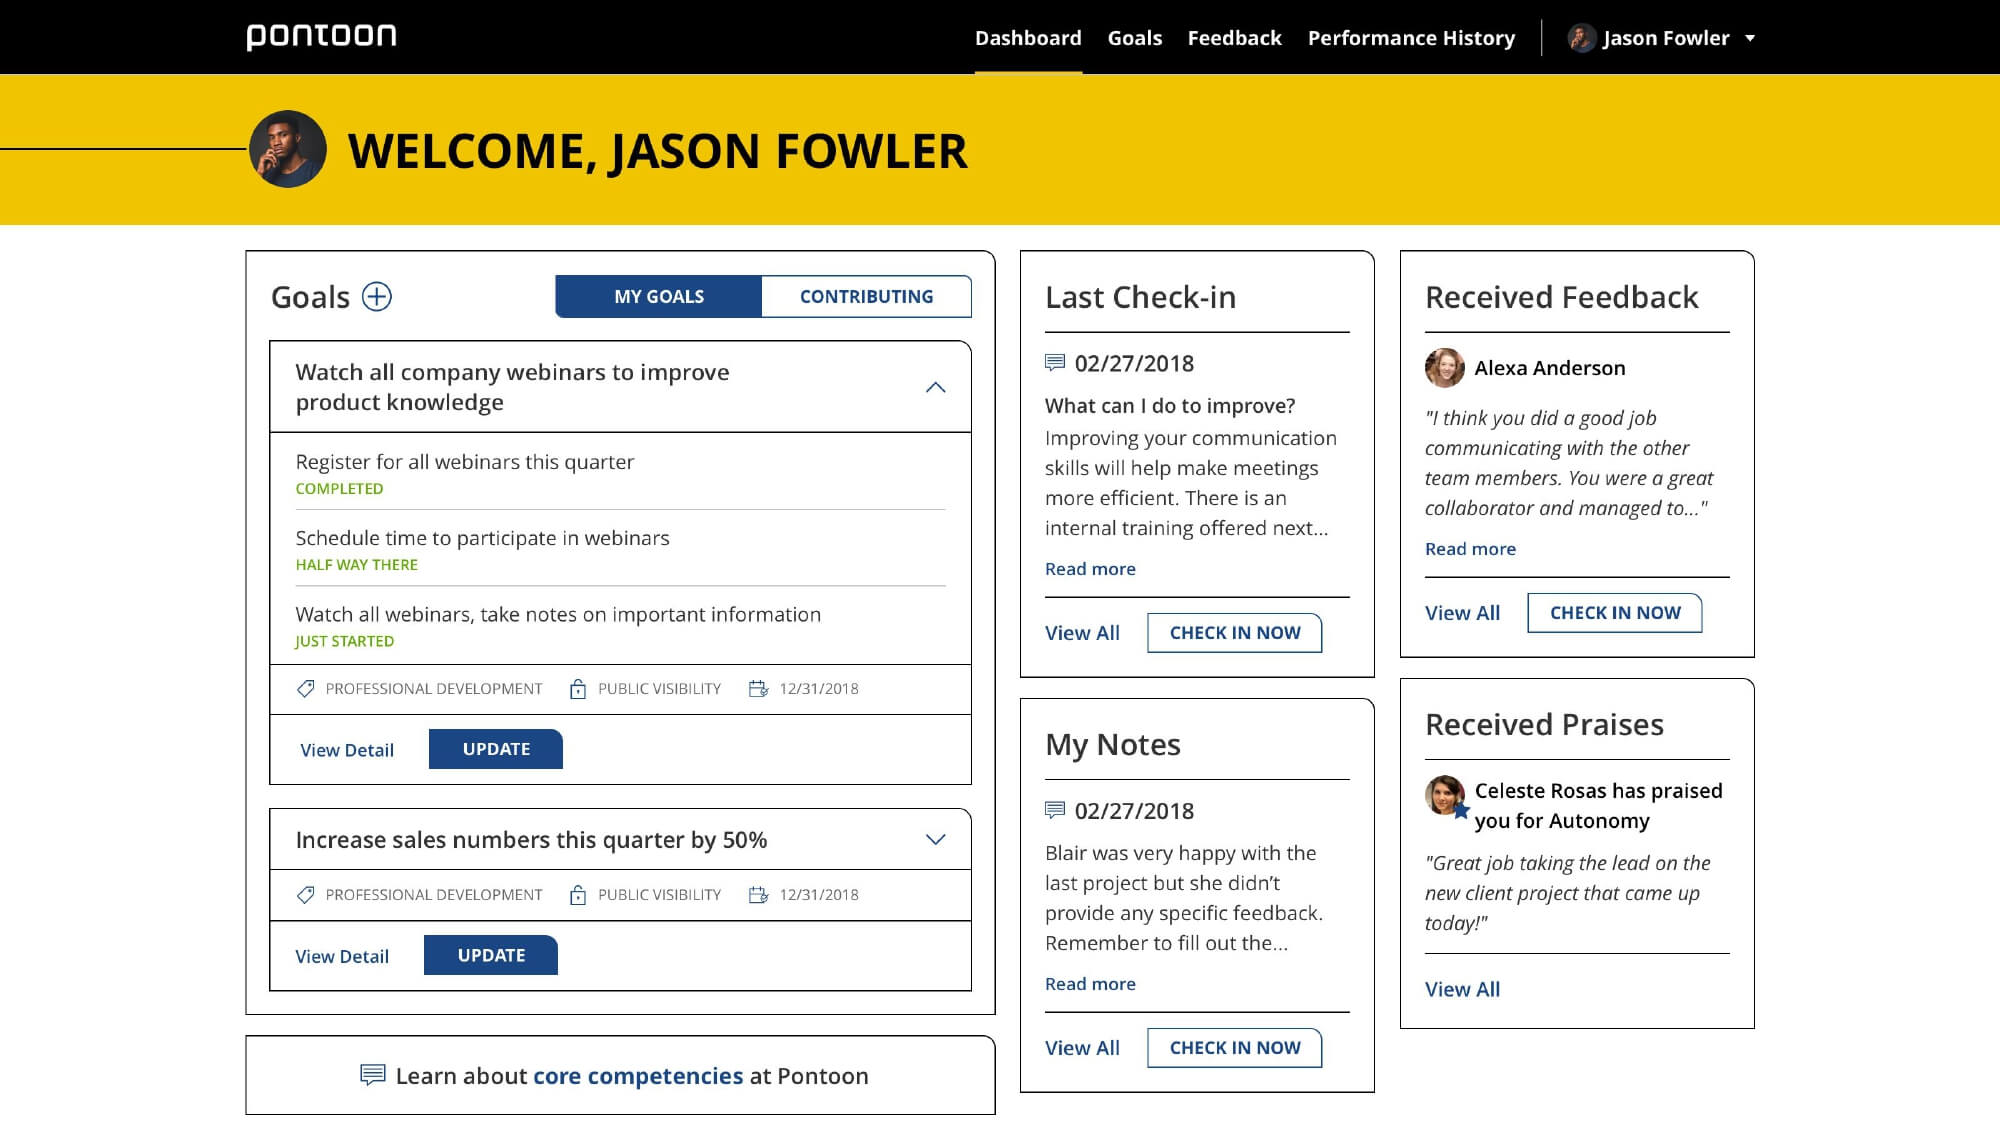 A performance management portal branded with Pontoon's colors showing an employee's development plan, goals, and feedback.